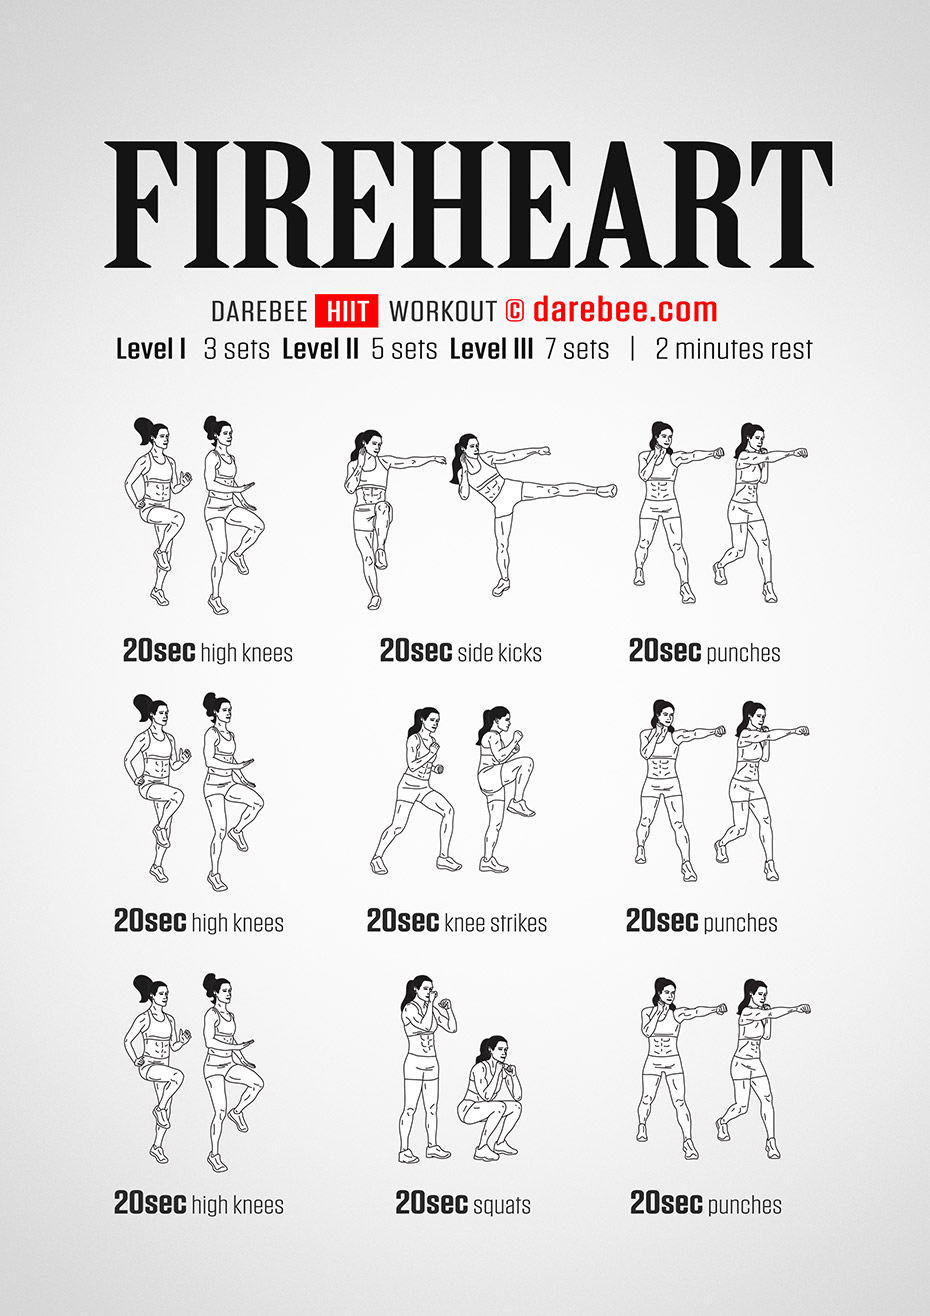 Fireheart free HIIT workout by Darebee